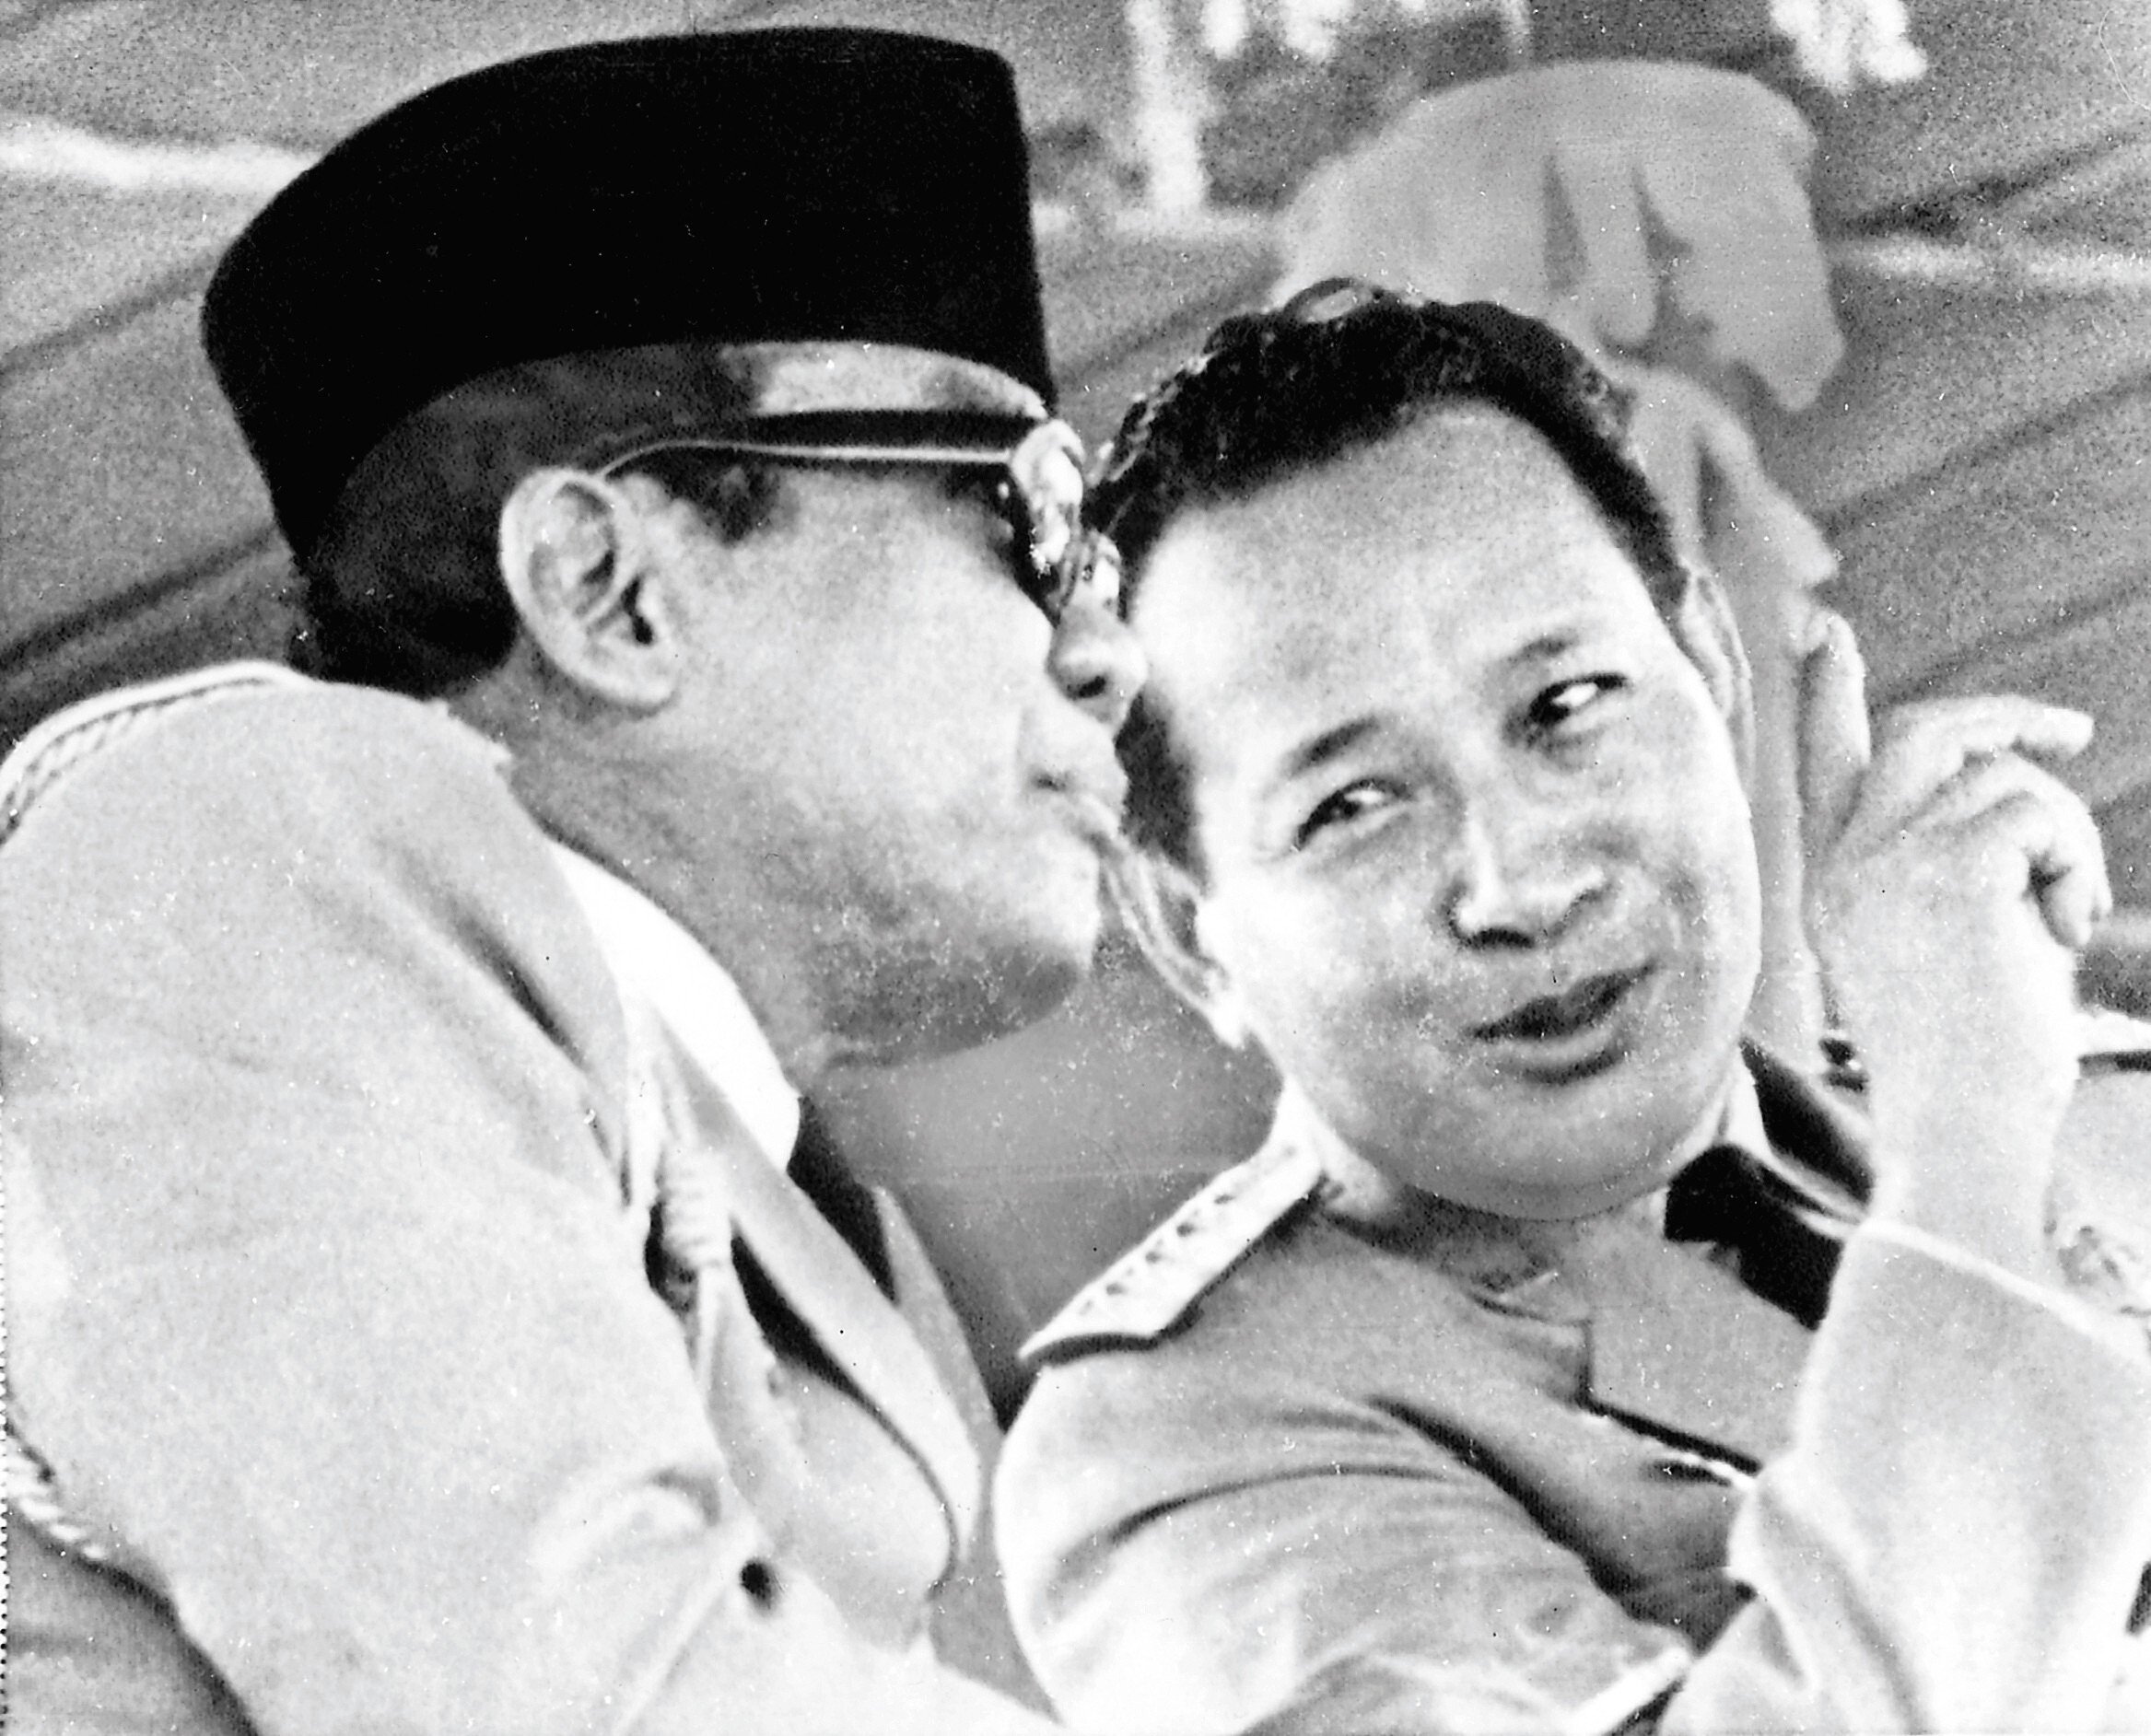 Indonesian president Sukarno (left), who handed over his presidential power to military strongman Suharto in February 1967, is shown with Suharto during an Independence Day Parade in Jakarta, in October 1966. Photo: AP